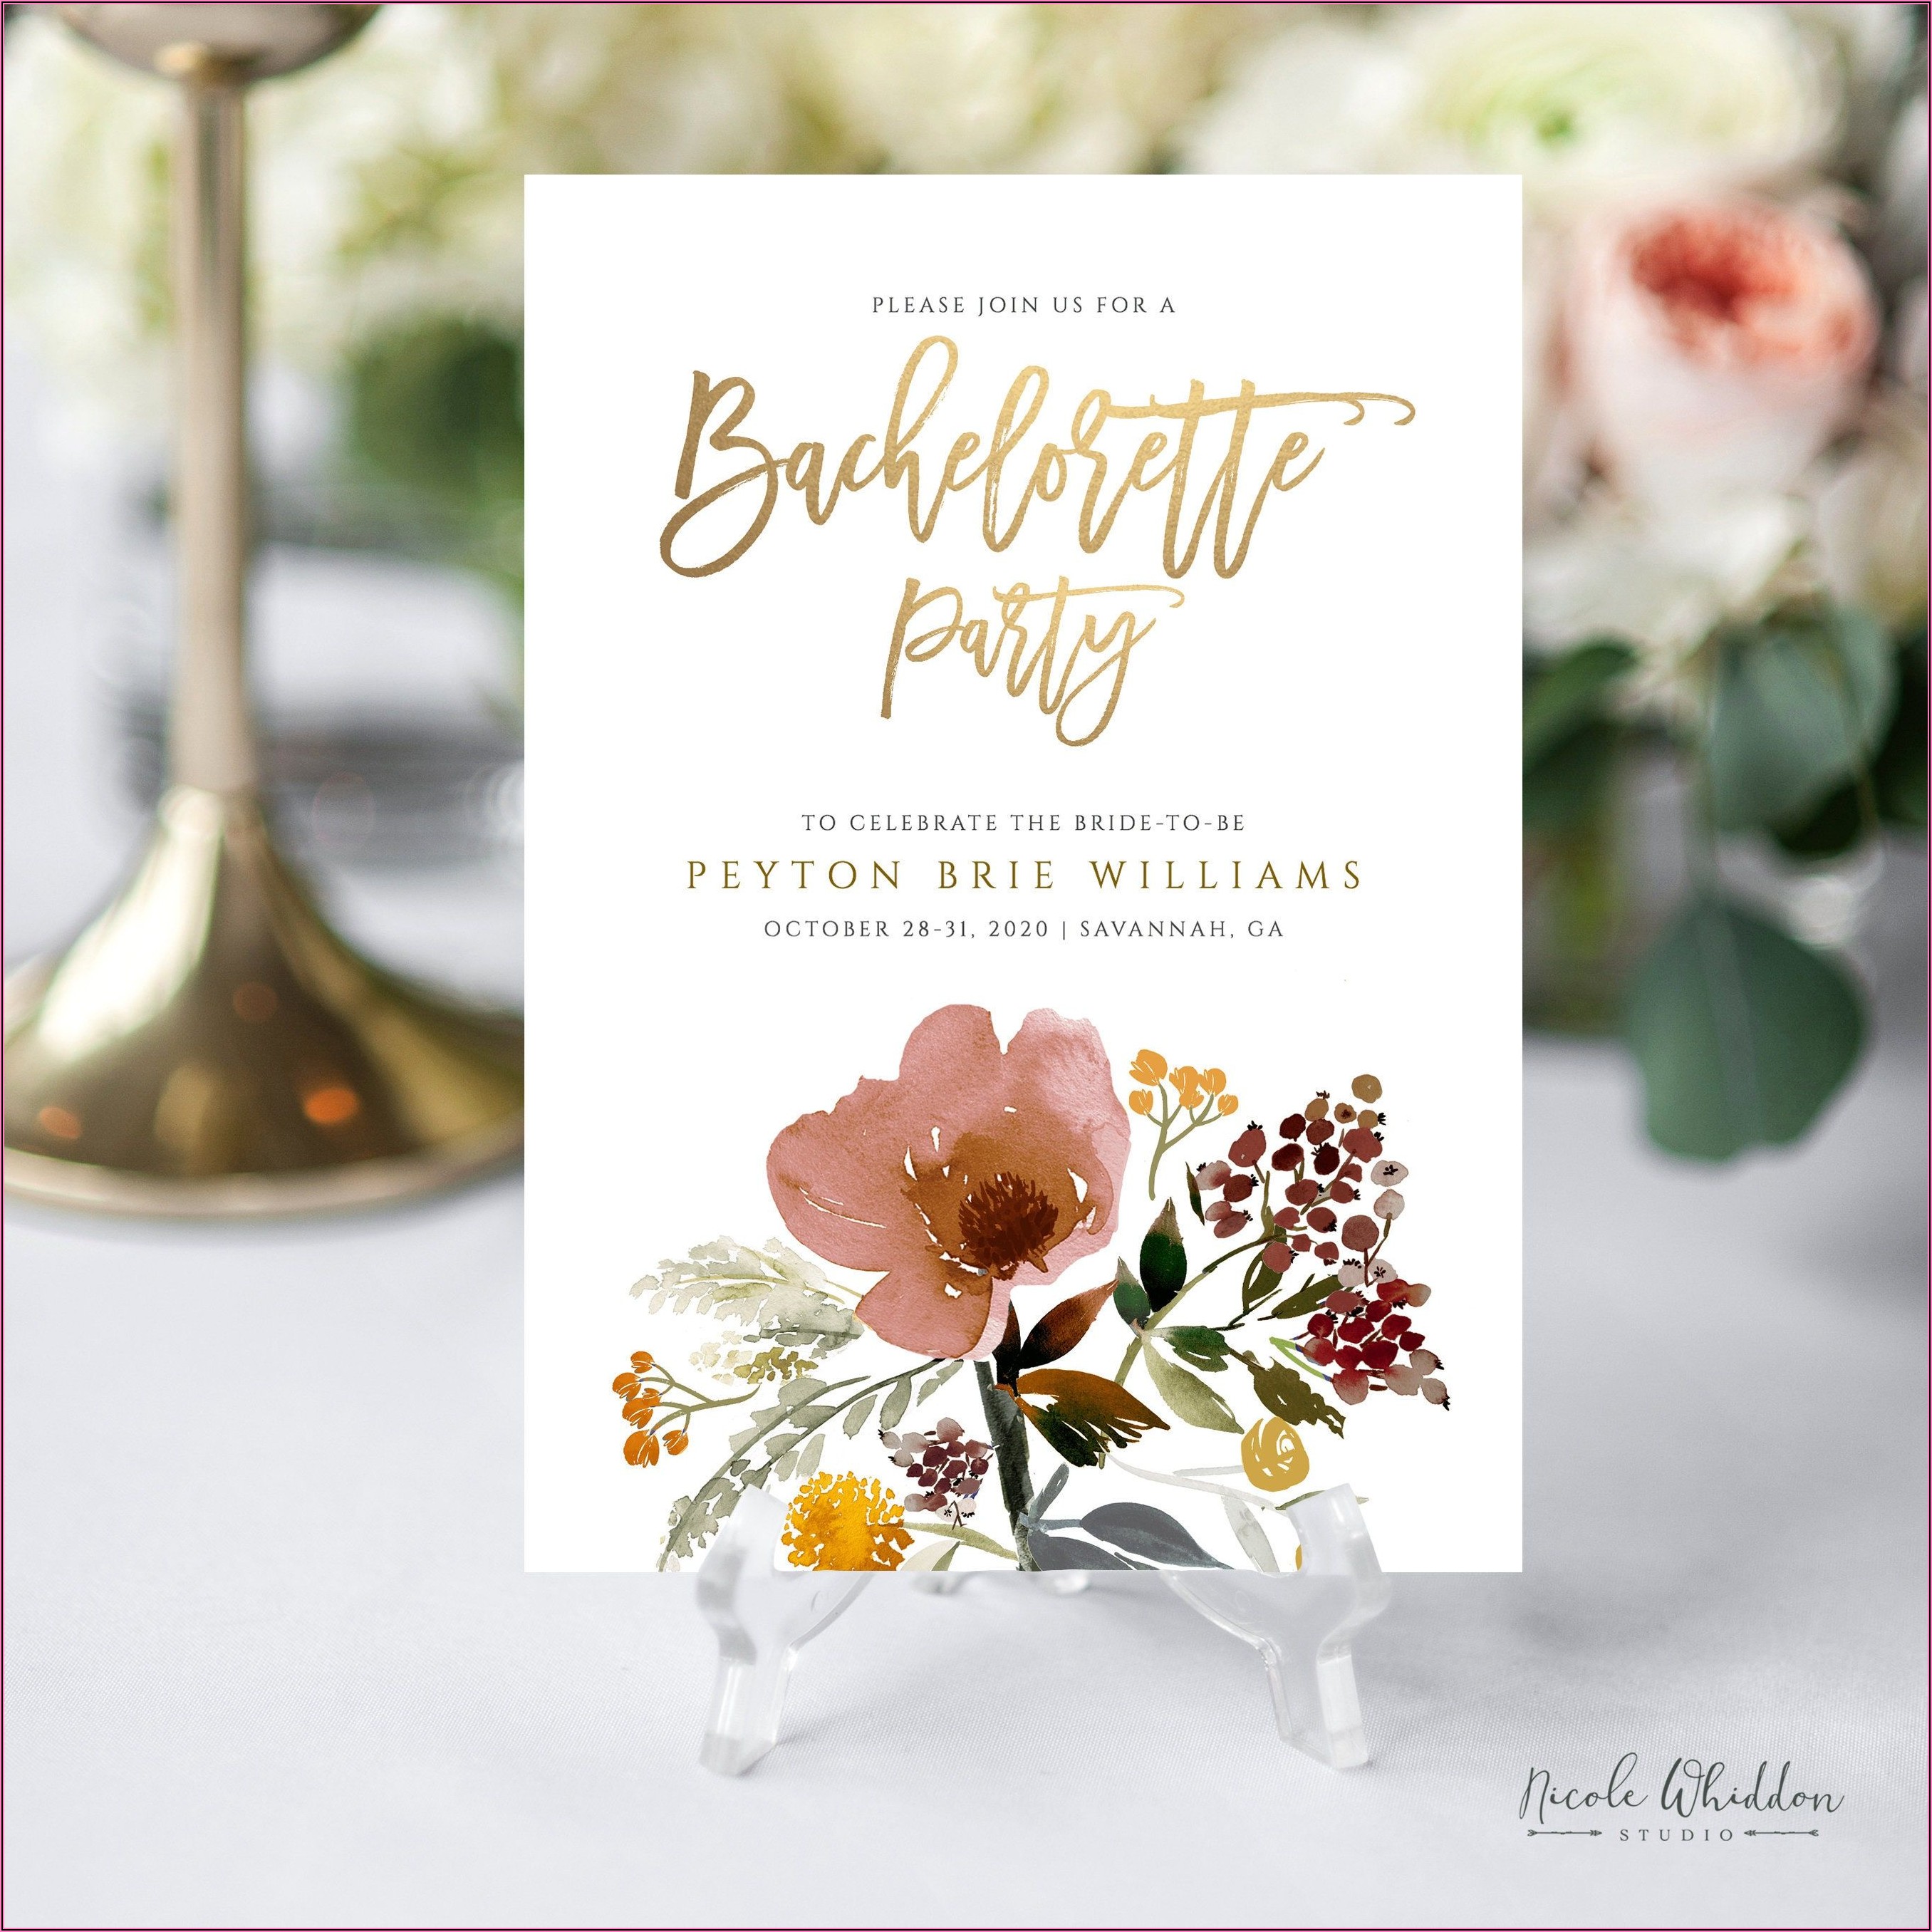 Bachelorette Party Invites With Itinerary